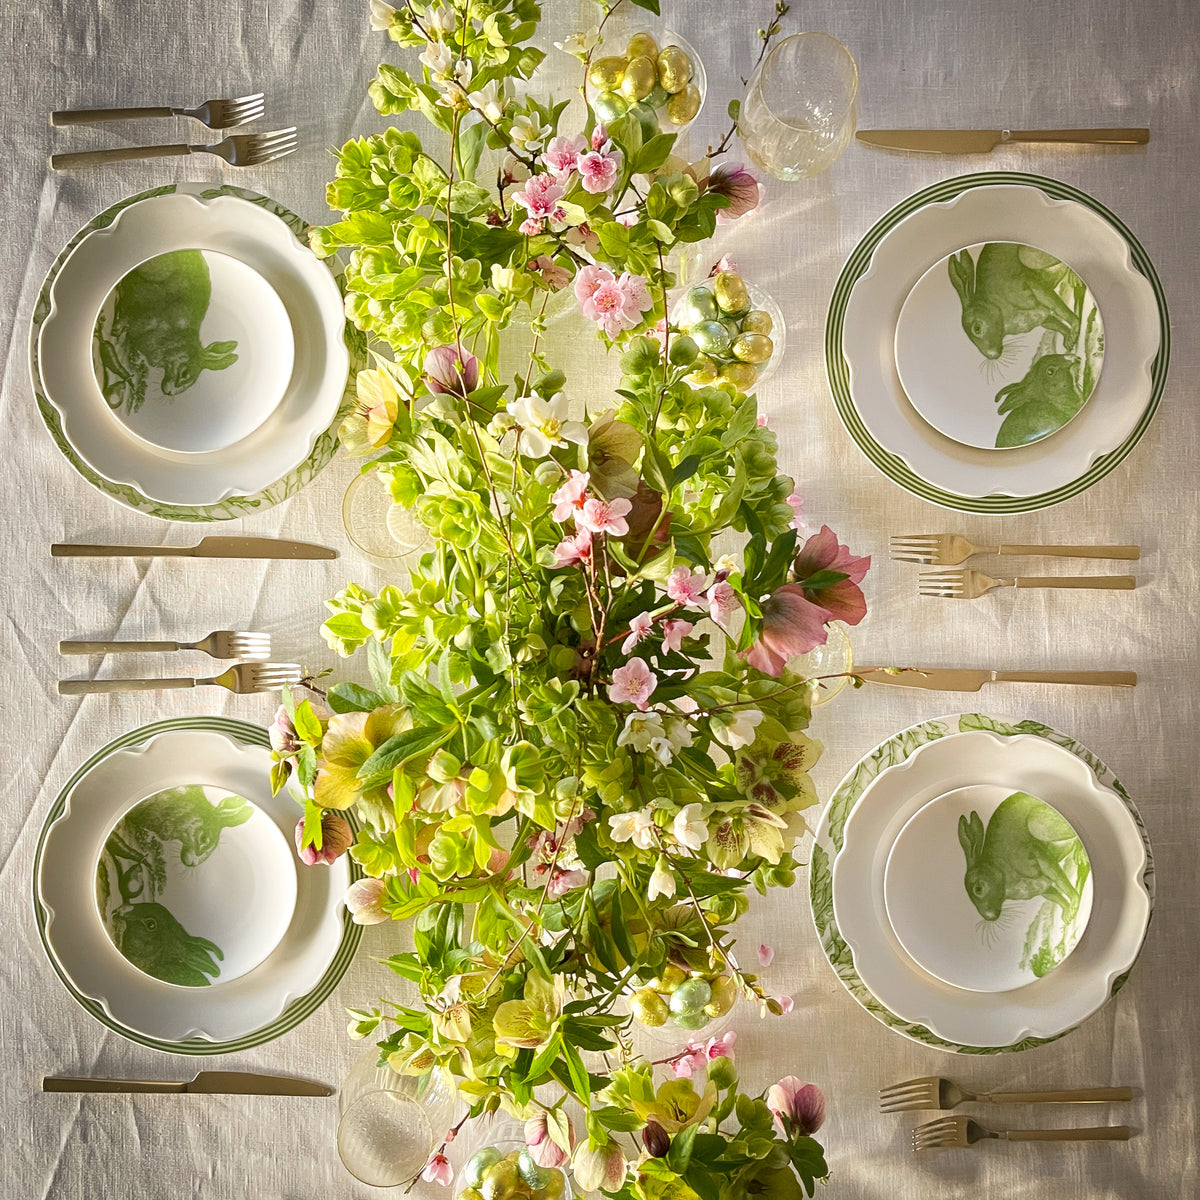 A table setting with delicate pink and Green Bunnies Canapé Plates arranged alongside porcelain plates.